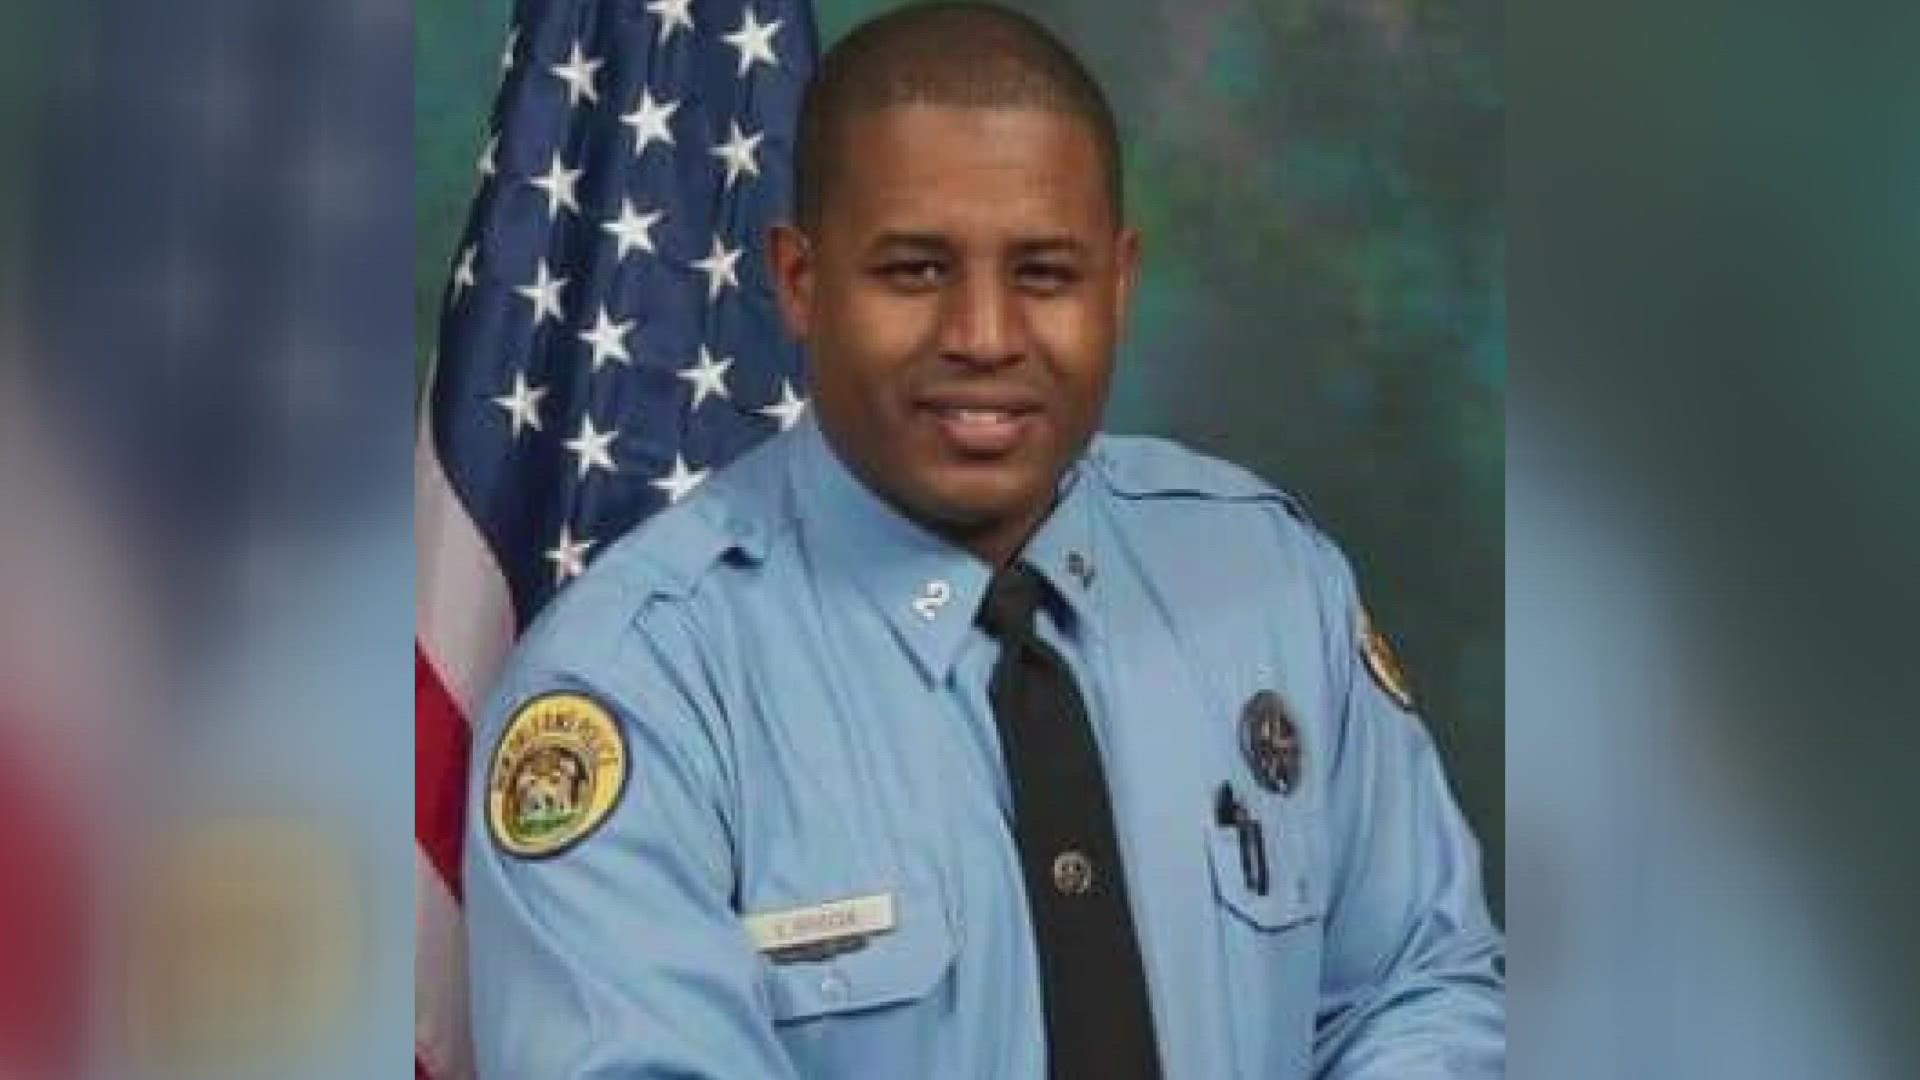 The NOPD is mourning the loss of one of their own.. Officer Everett Briscoe was shot and killed at a Houston restaurant after armed robbers opened fire.